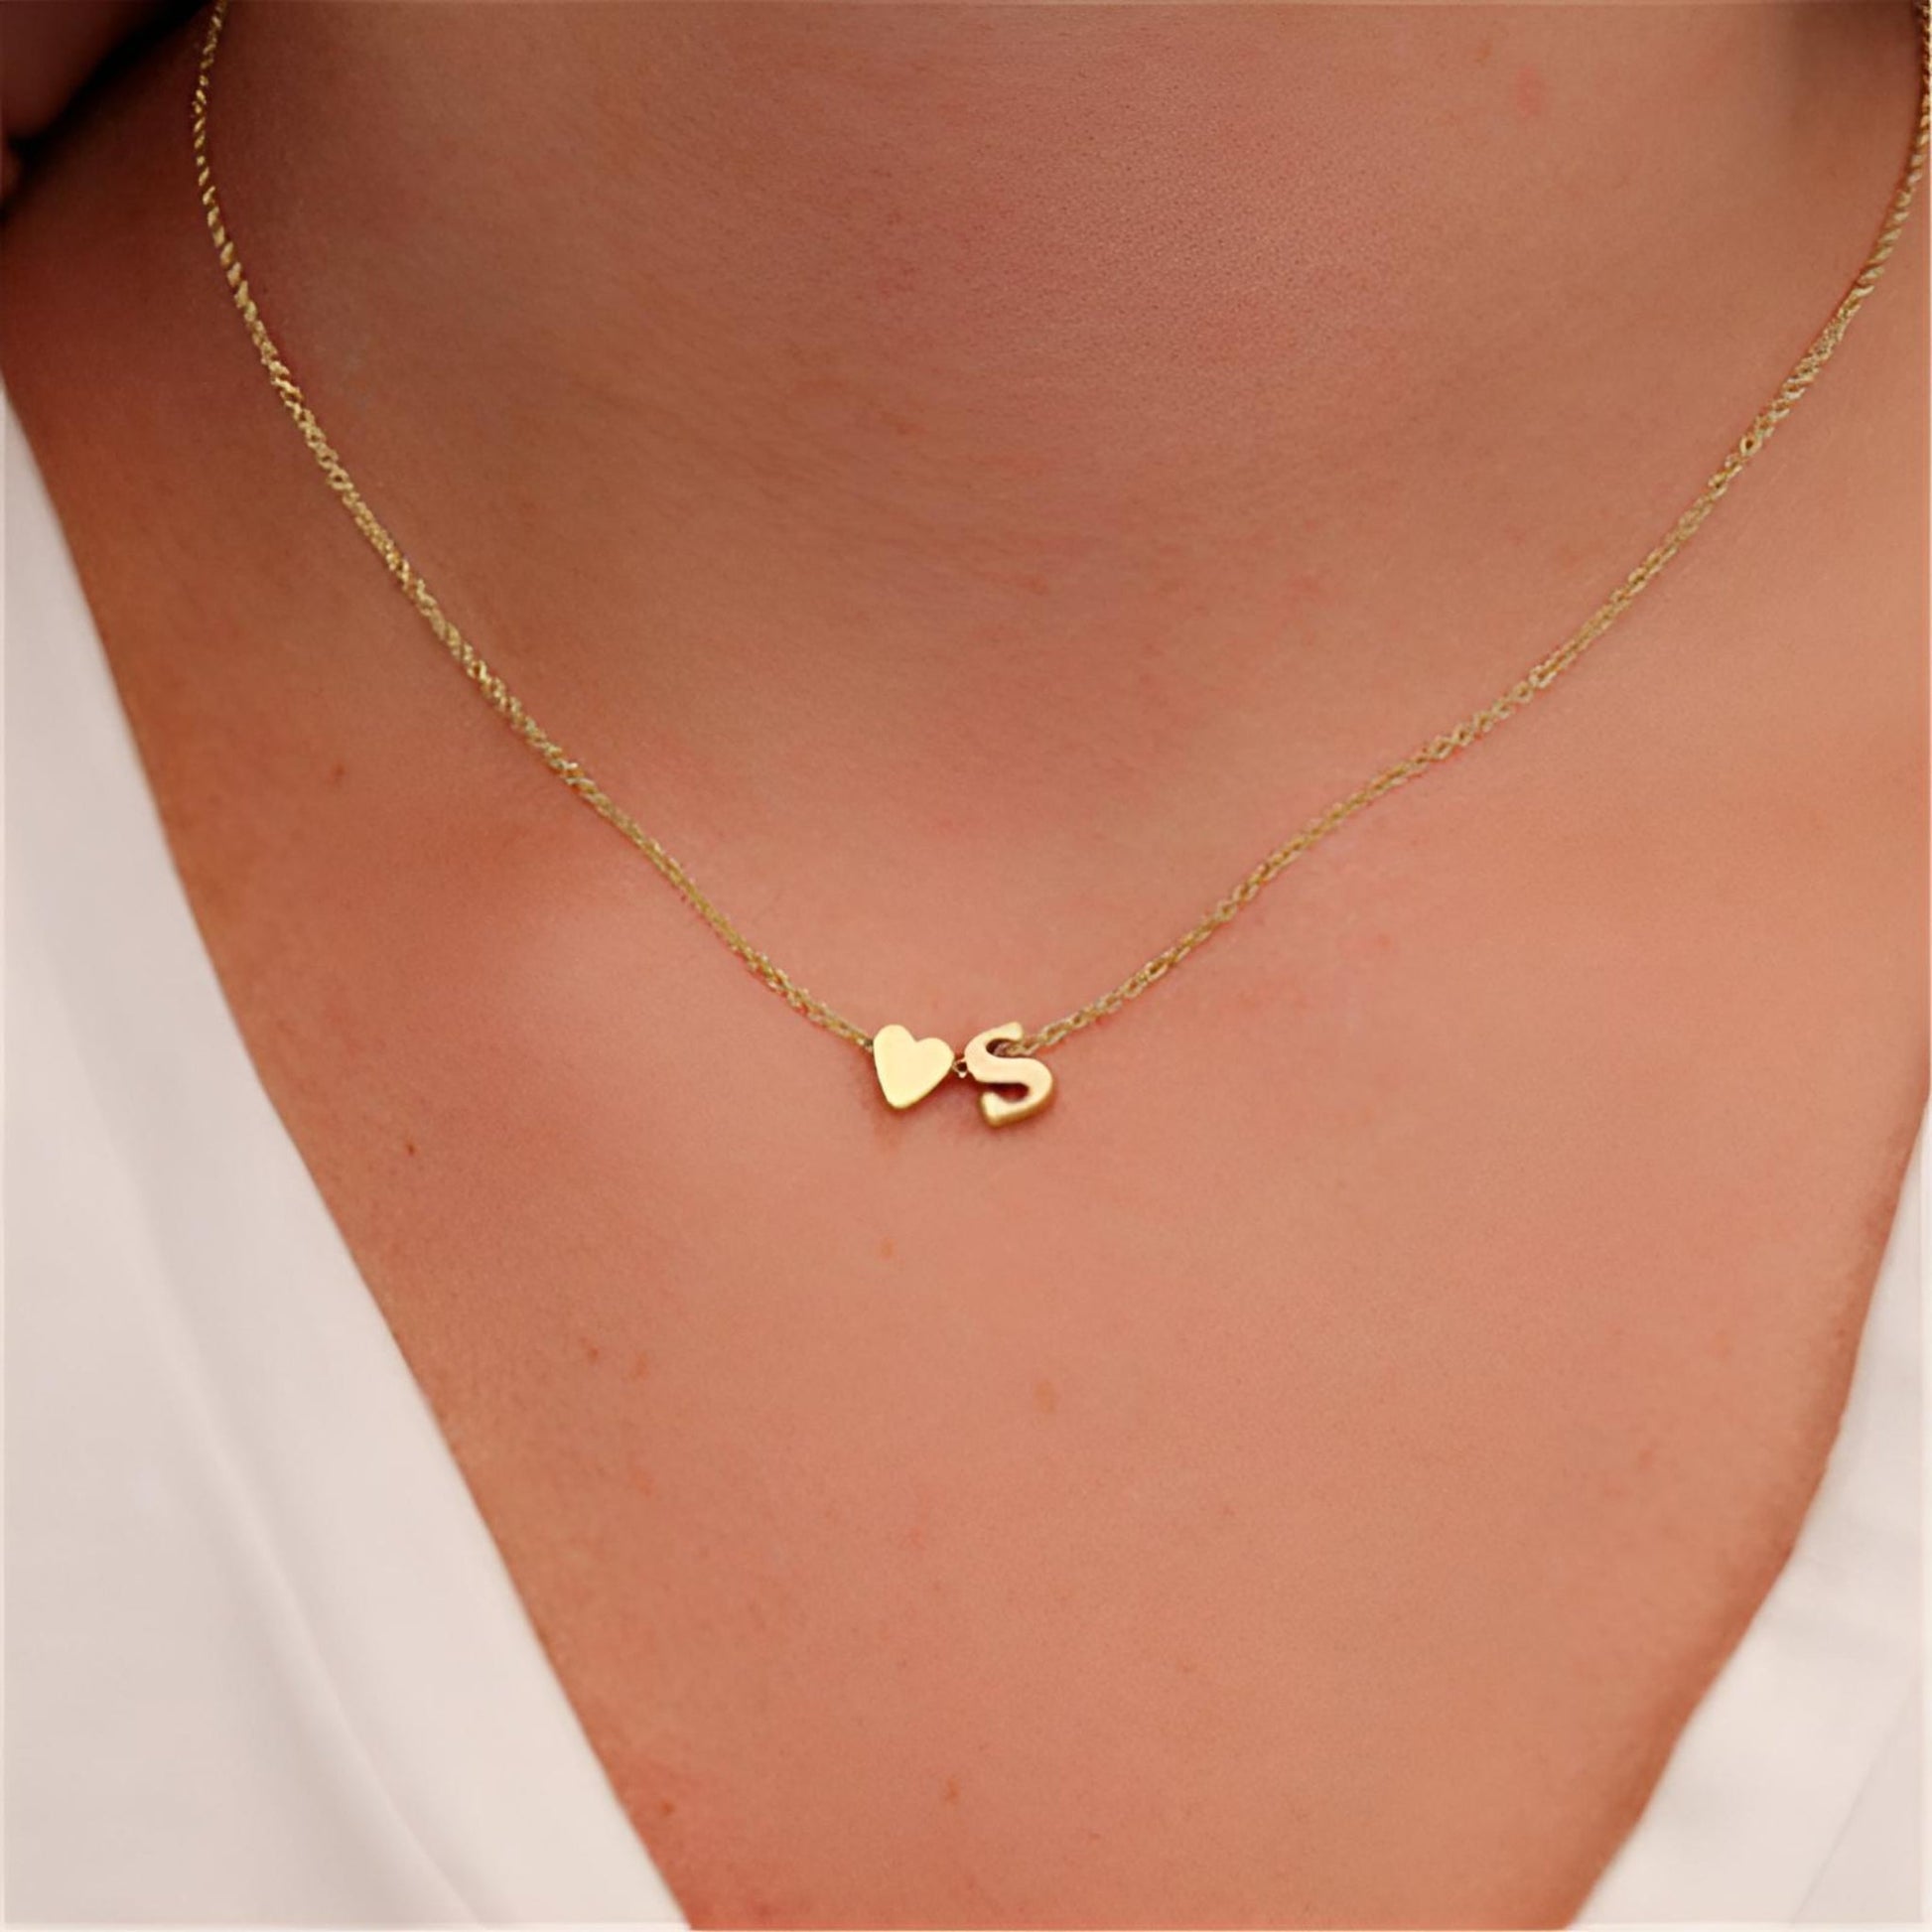 Heart Shaped Letter Necklace - Initial Pendant - Gifting By Julia M